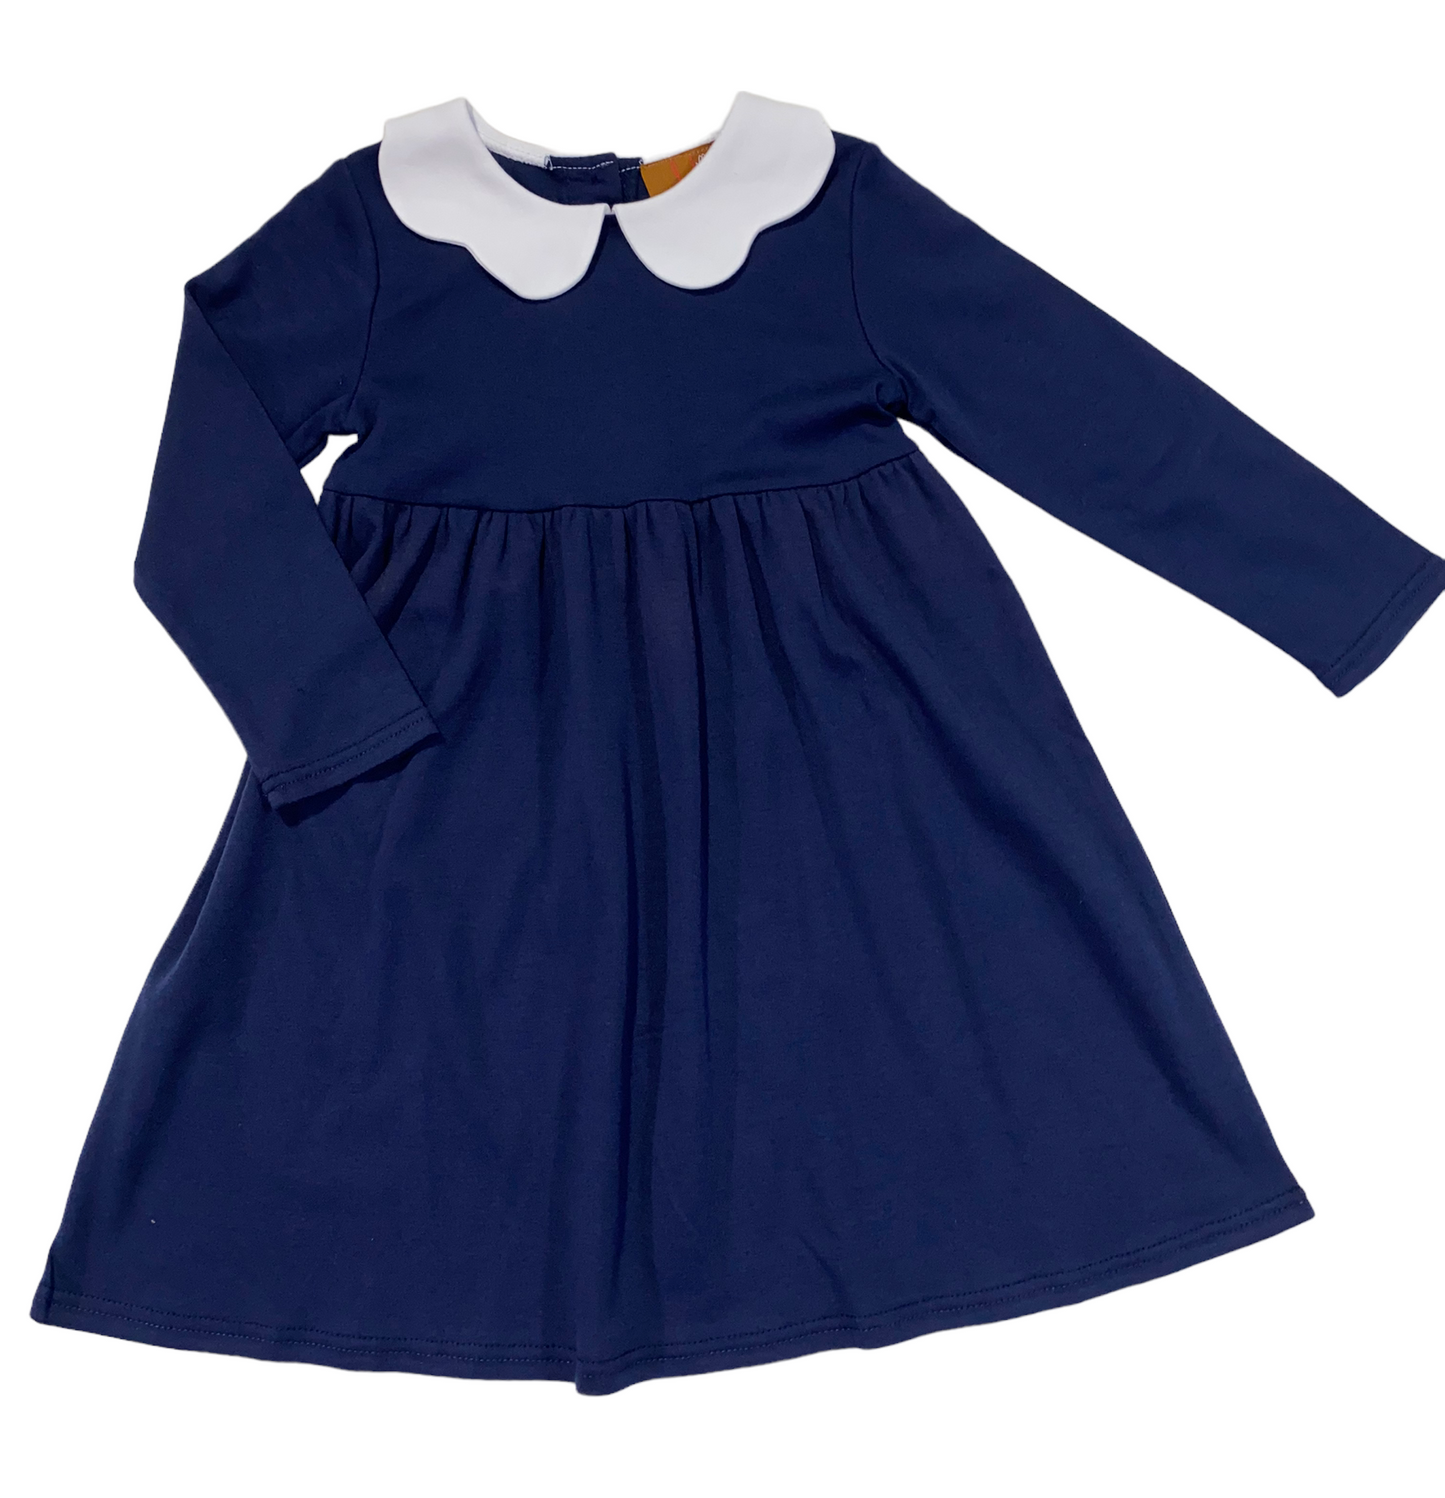 Solid Navy Dress With White Collar